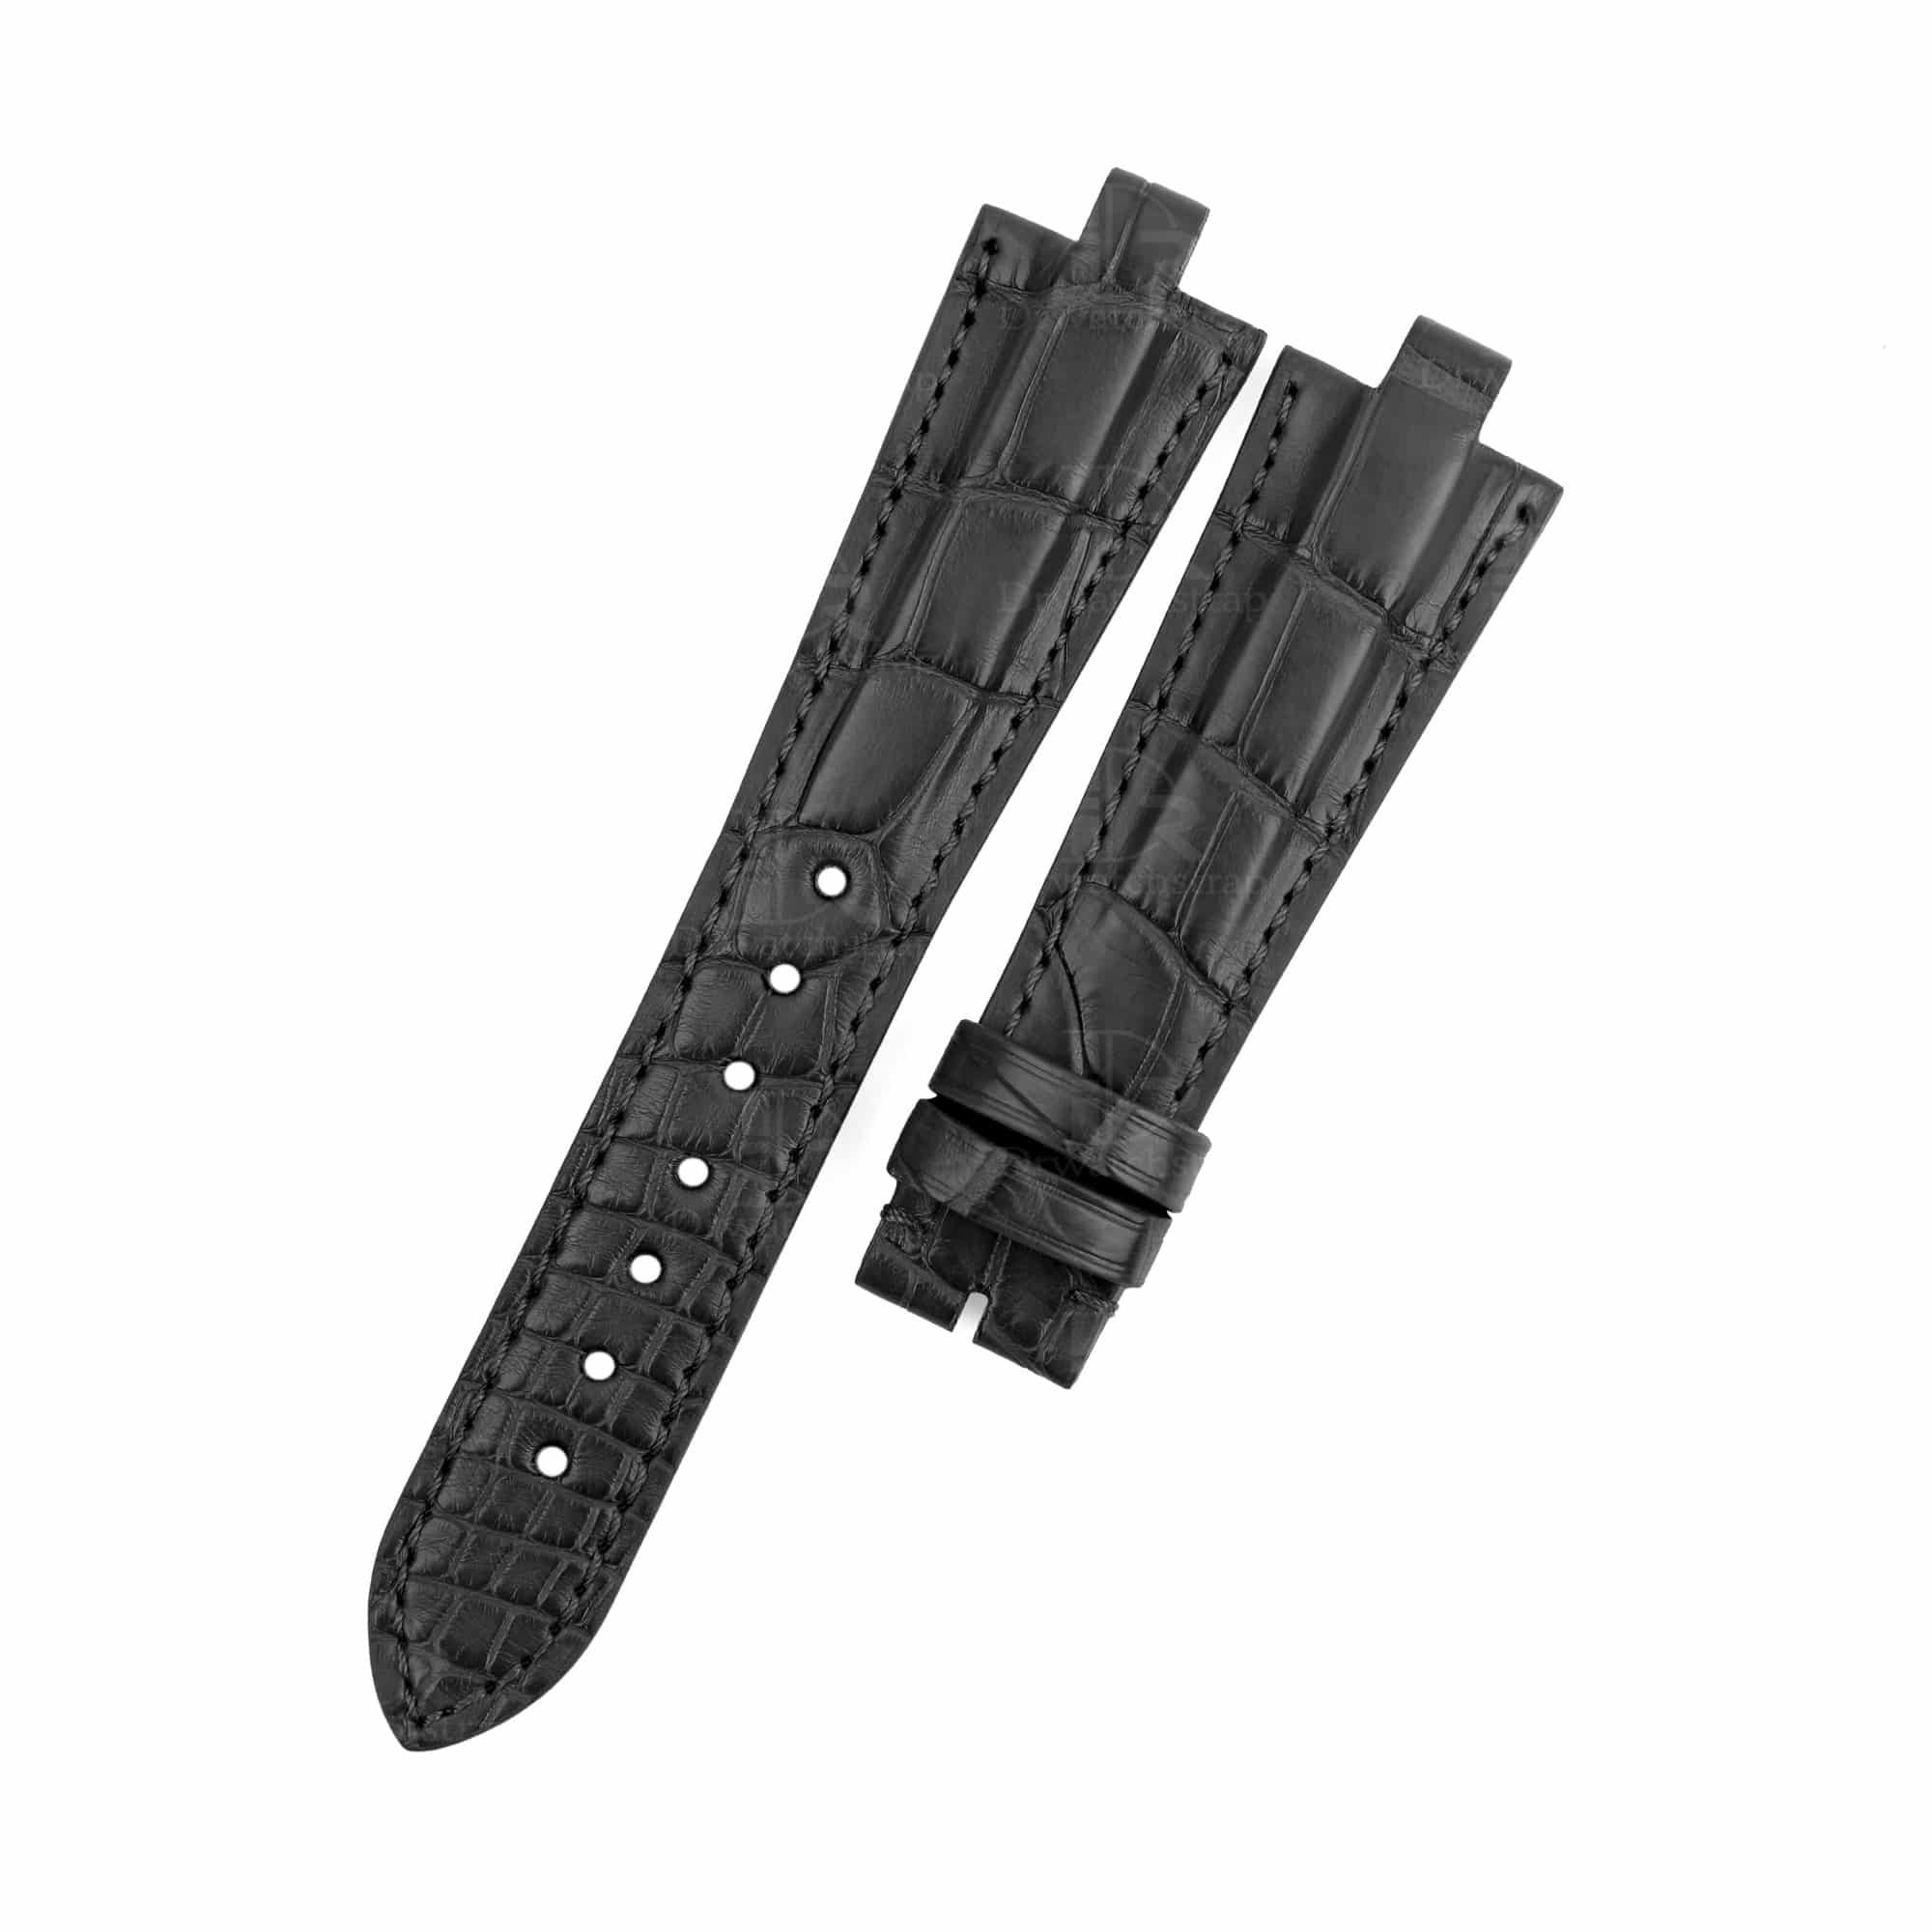 Genuine best quality Belly-scale black alligator crocodile custom Bvlgari leather watch strap & watch band replacement for Bvlgari Diagono Aluminium AL38A L3276 mens and women's luxury watch - OEM aftermarket high-end straps and watchbands online at a low price from dr watchstrap